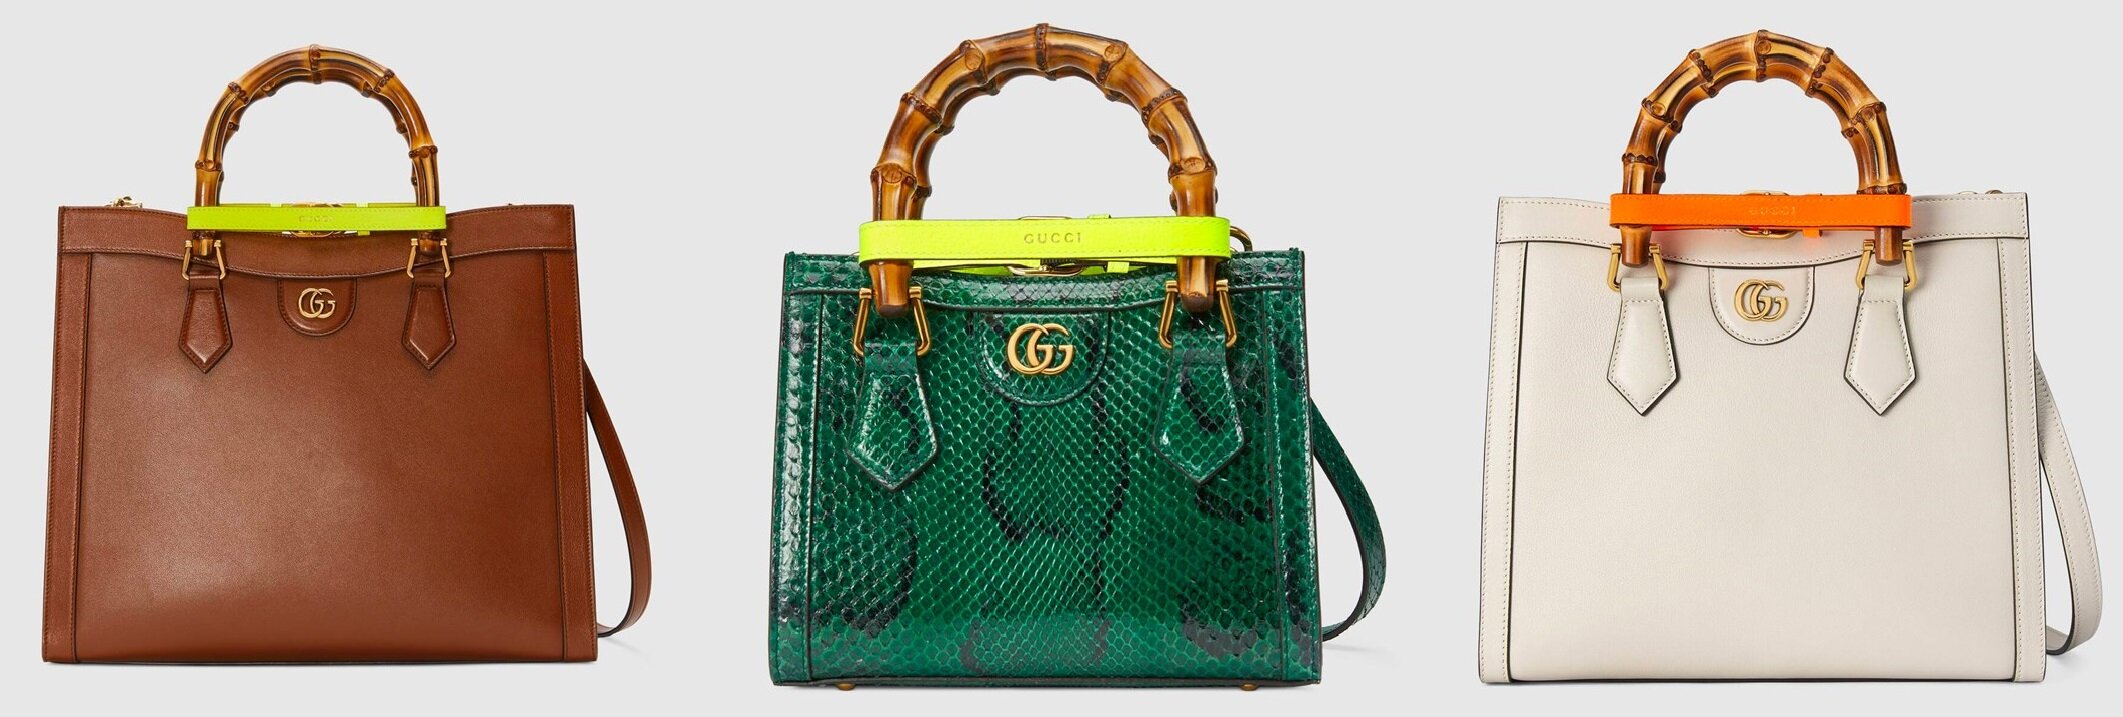 Gucci Diana Bag Honors Her Memory at Gucci Bamboo House in Kyoto, Japan —  Anne of Carversville